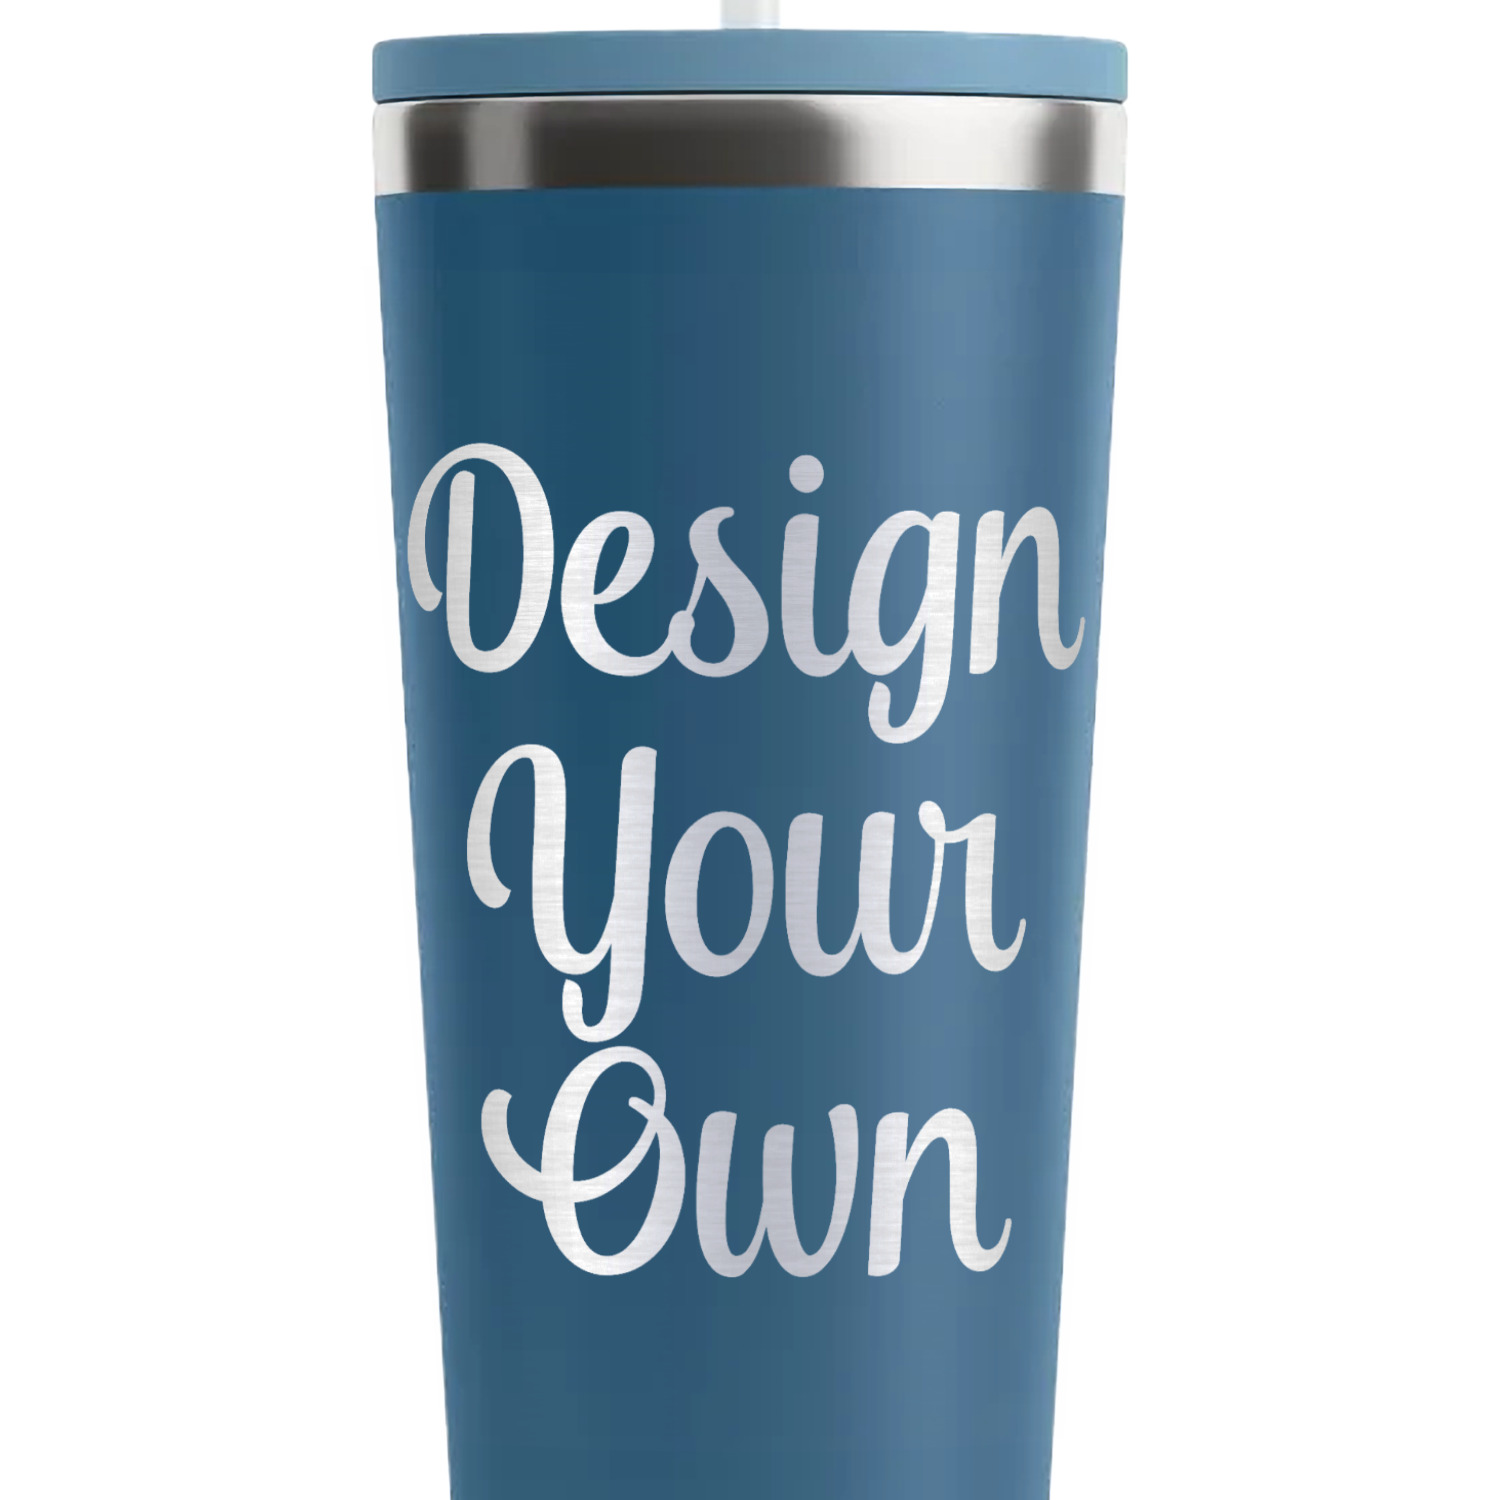 https://www.youcustomizeit.com/common/MAKE/965833/Design-Your-Own-Steel-Blue-RTIC-Everyday-Tumbler-28-oz-Close-Up.jpg?lm=1698249980